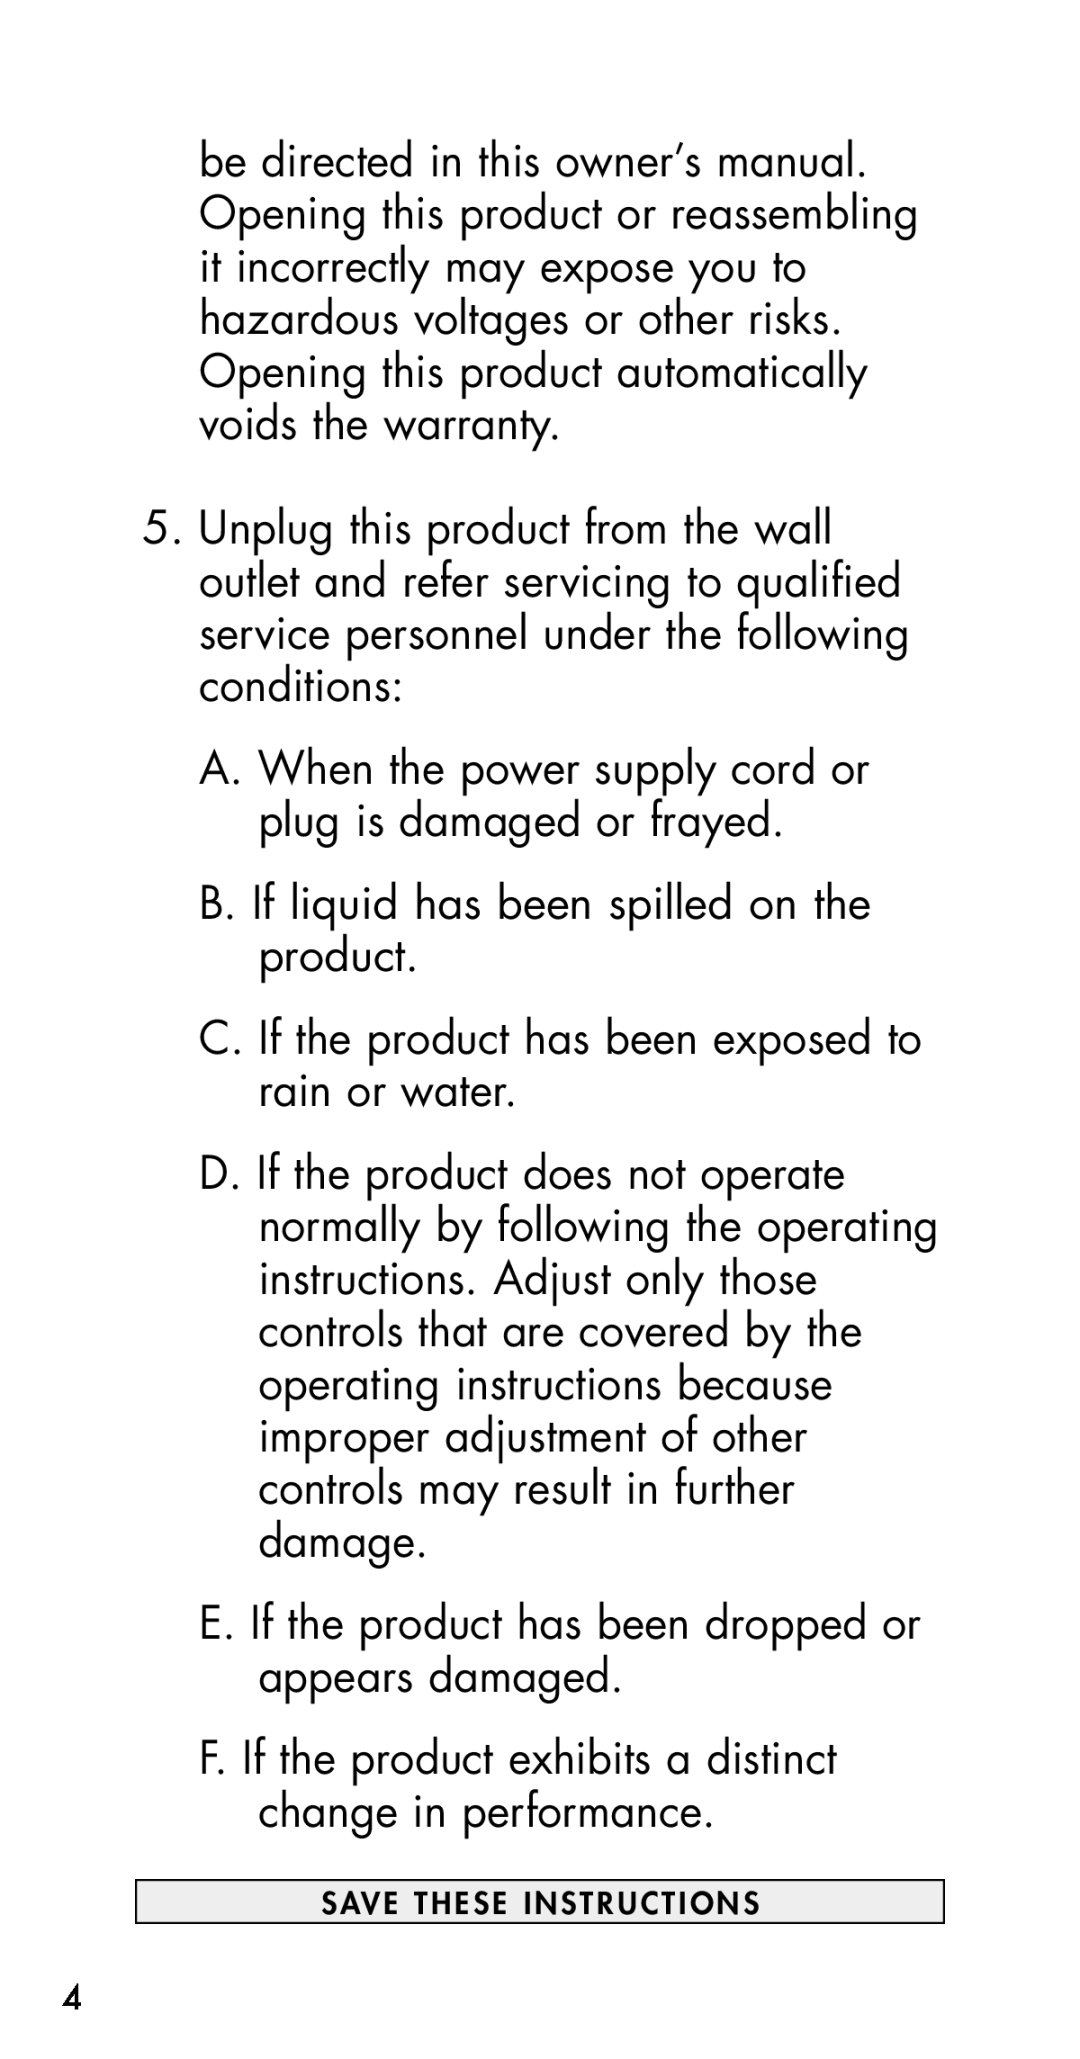 Plantronics Fire Alarm manual B.If liquid has been spilled on the product 